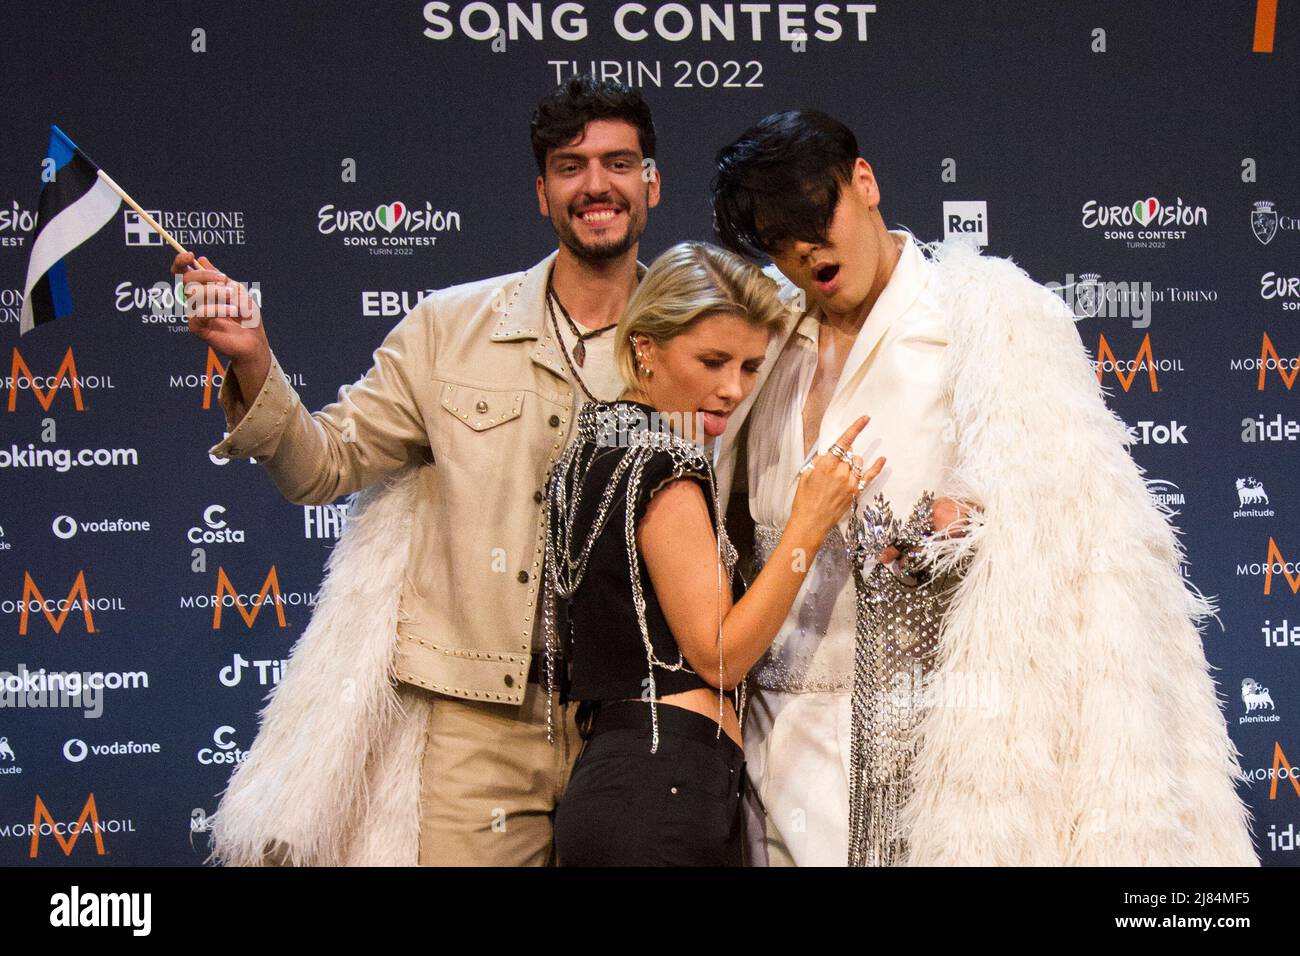 Torino, Italia. 12th May2022. Photocall of Singer calyfied for 2022 Eurovision Song Contest Final Credit: Marco Destefanis/Alamy Live News Foto Stock